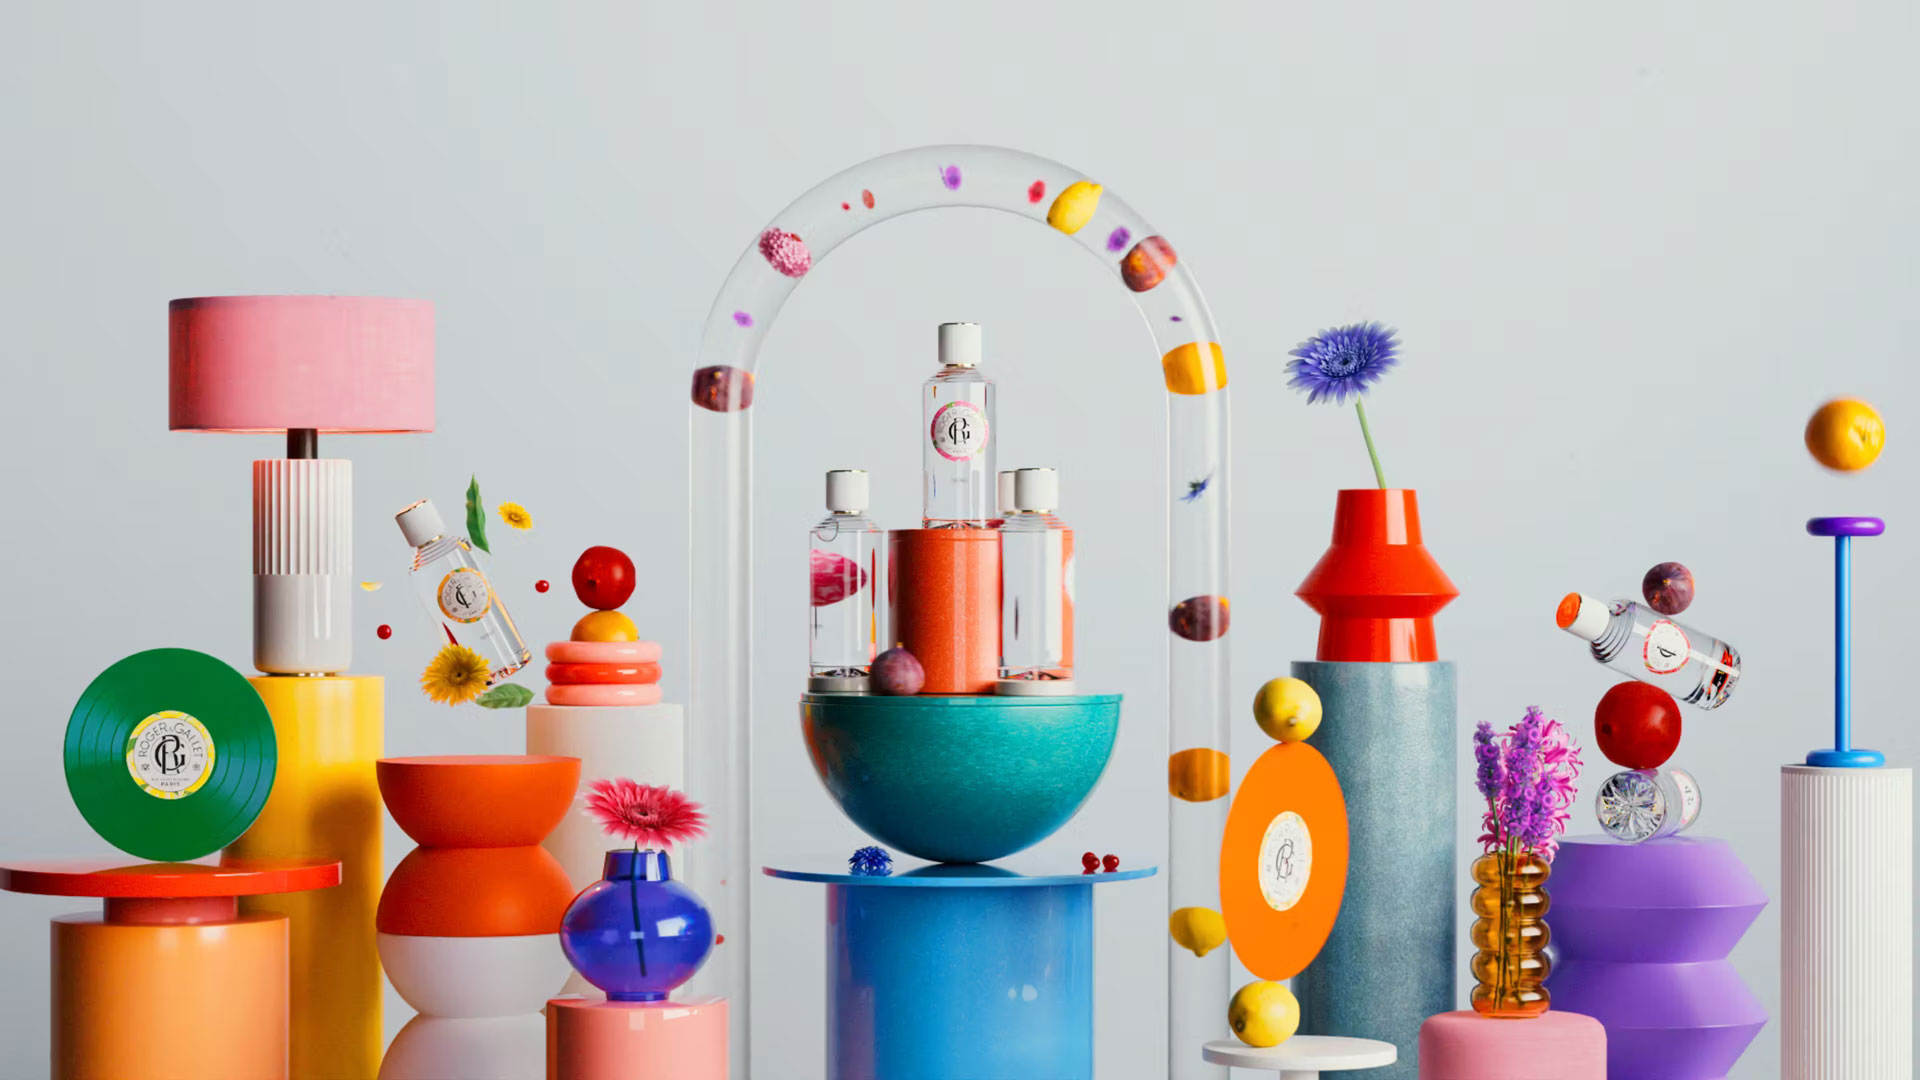 Sophisticated Happiness: Clim Studio for Roger & Gallet – Motion design [Video]